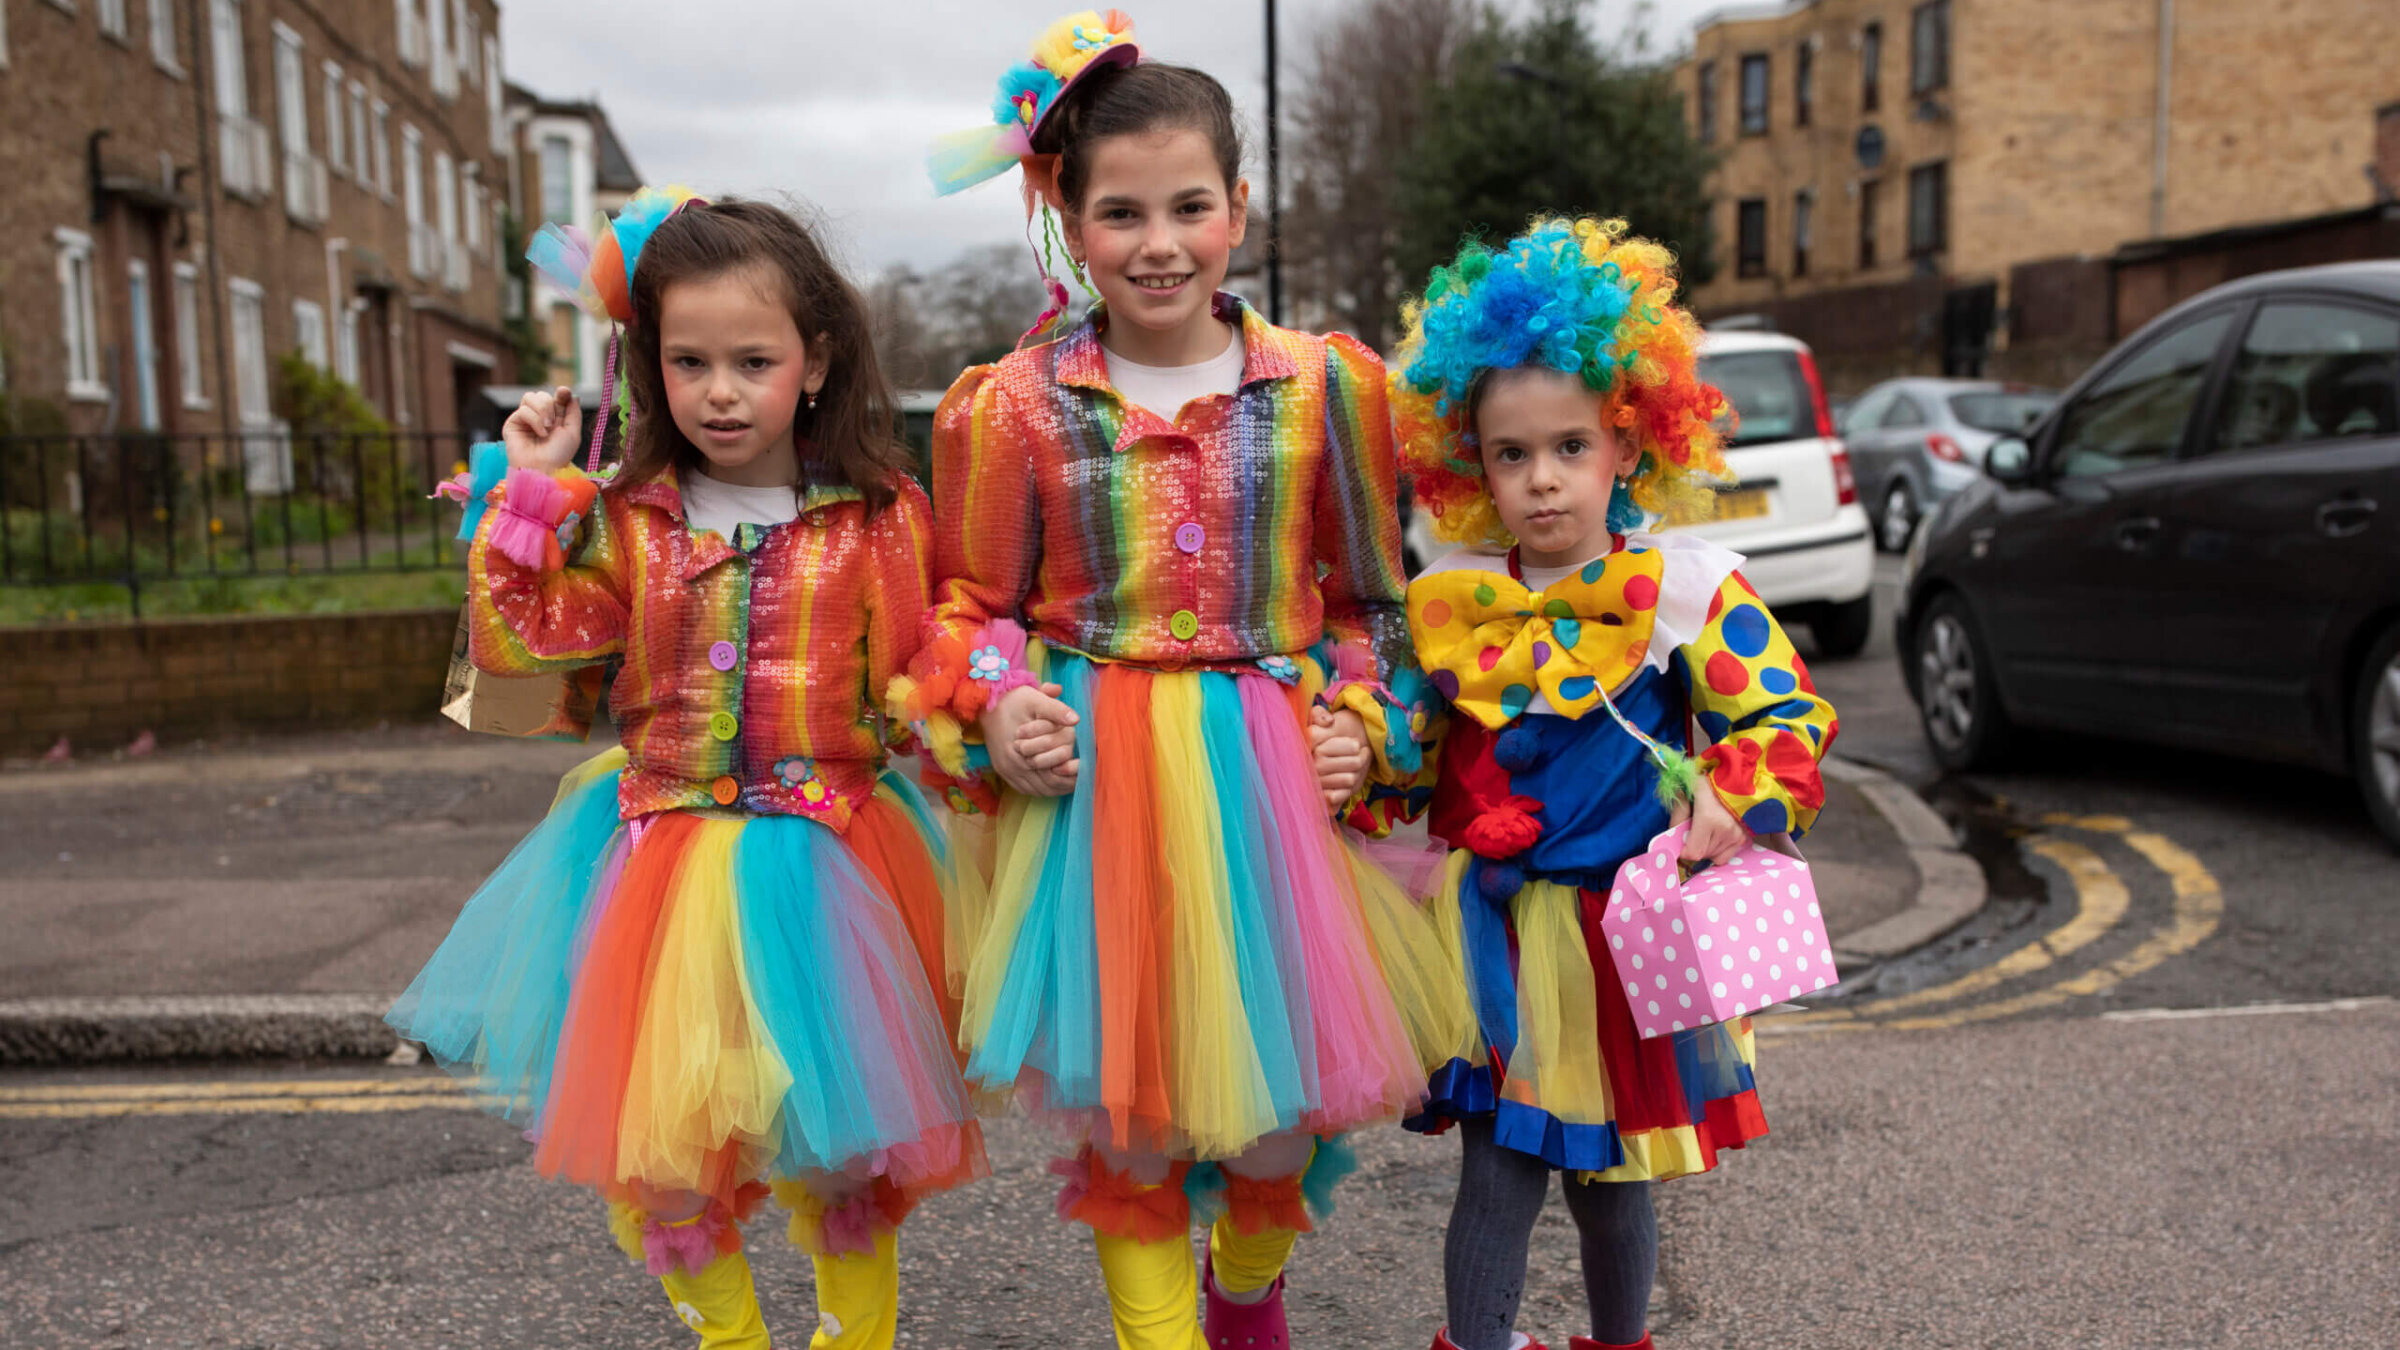 This family's Purim theme is clearly clowns.